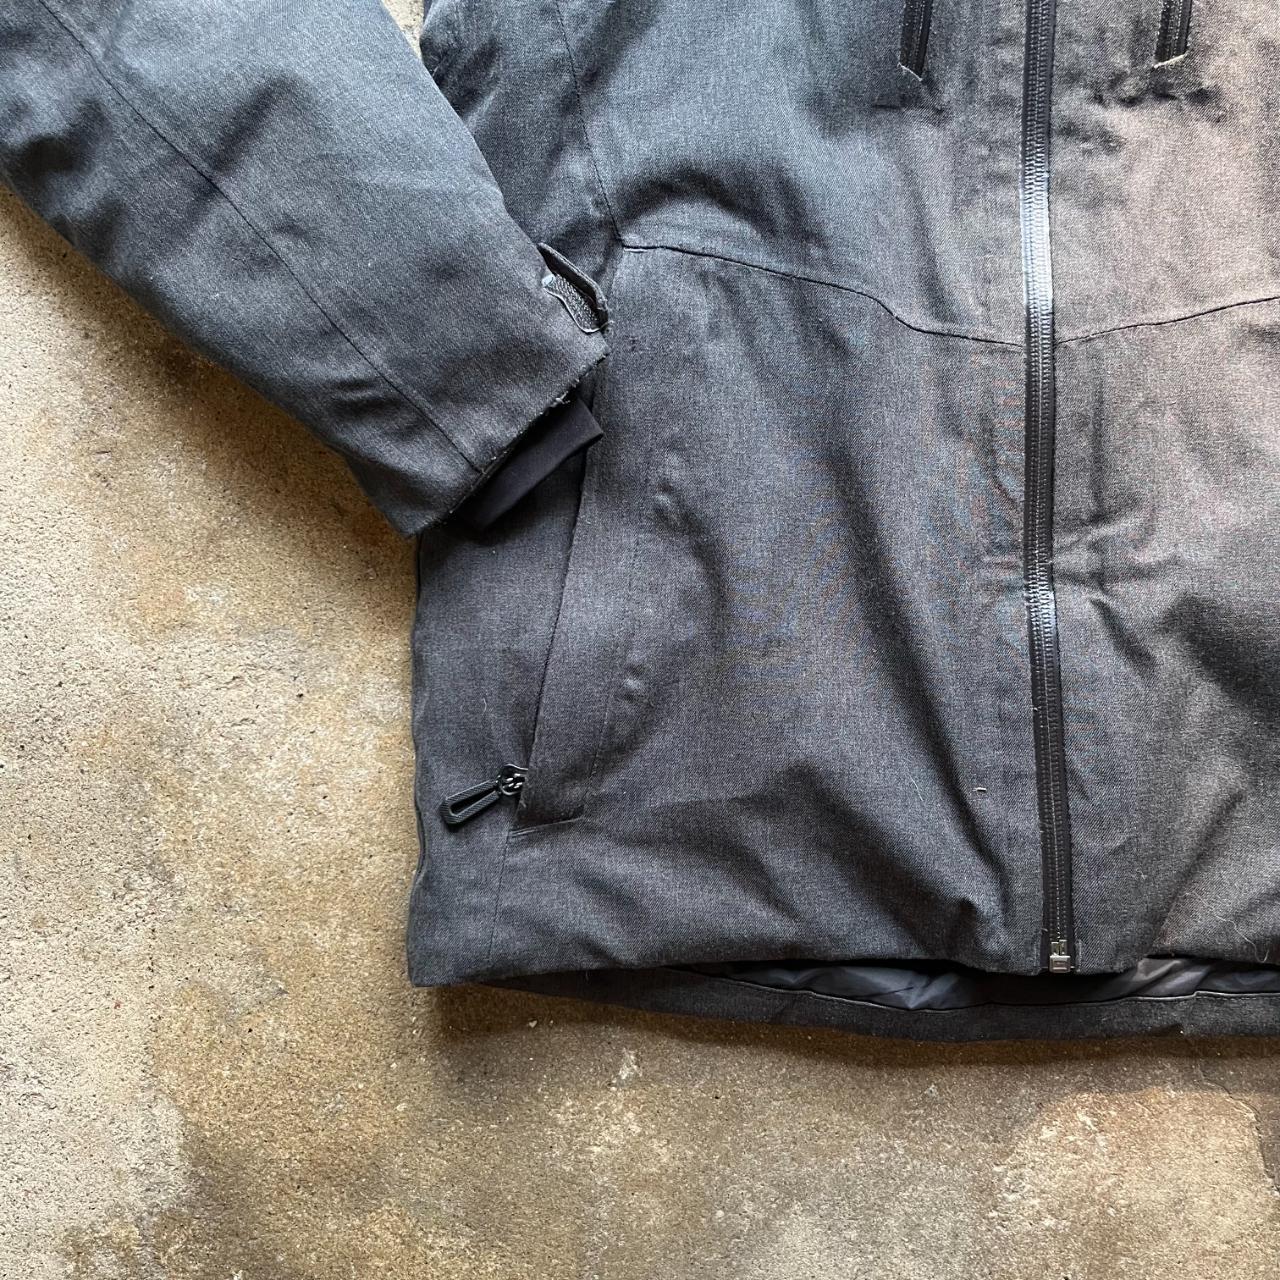 The North Face Men's Navy and Black Jacket